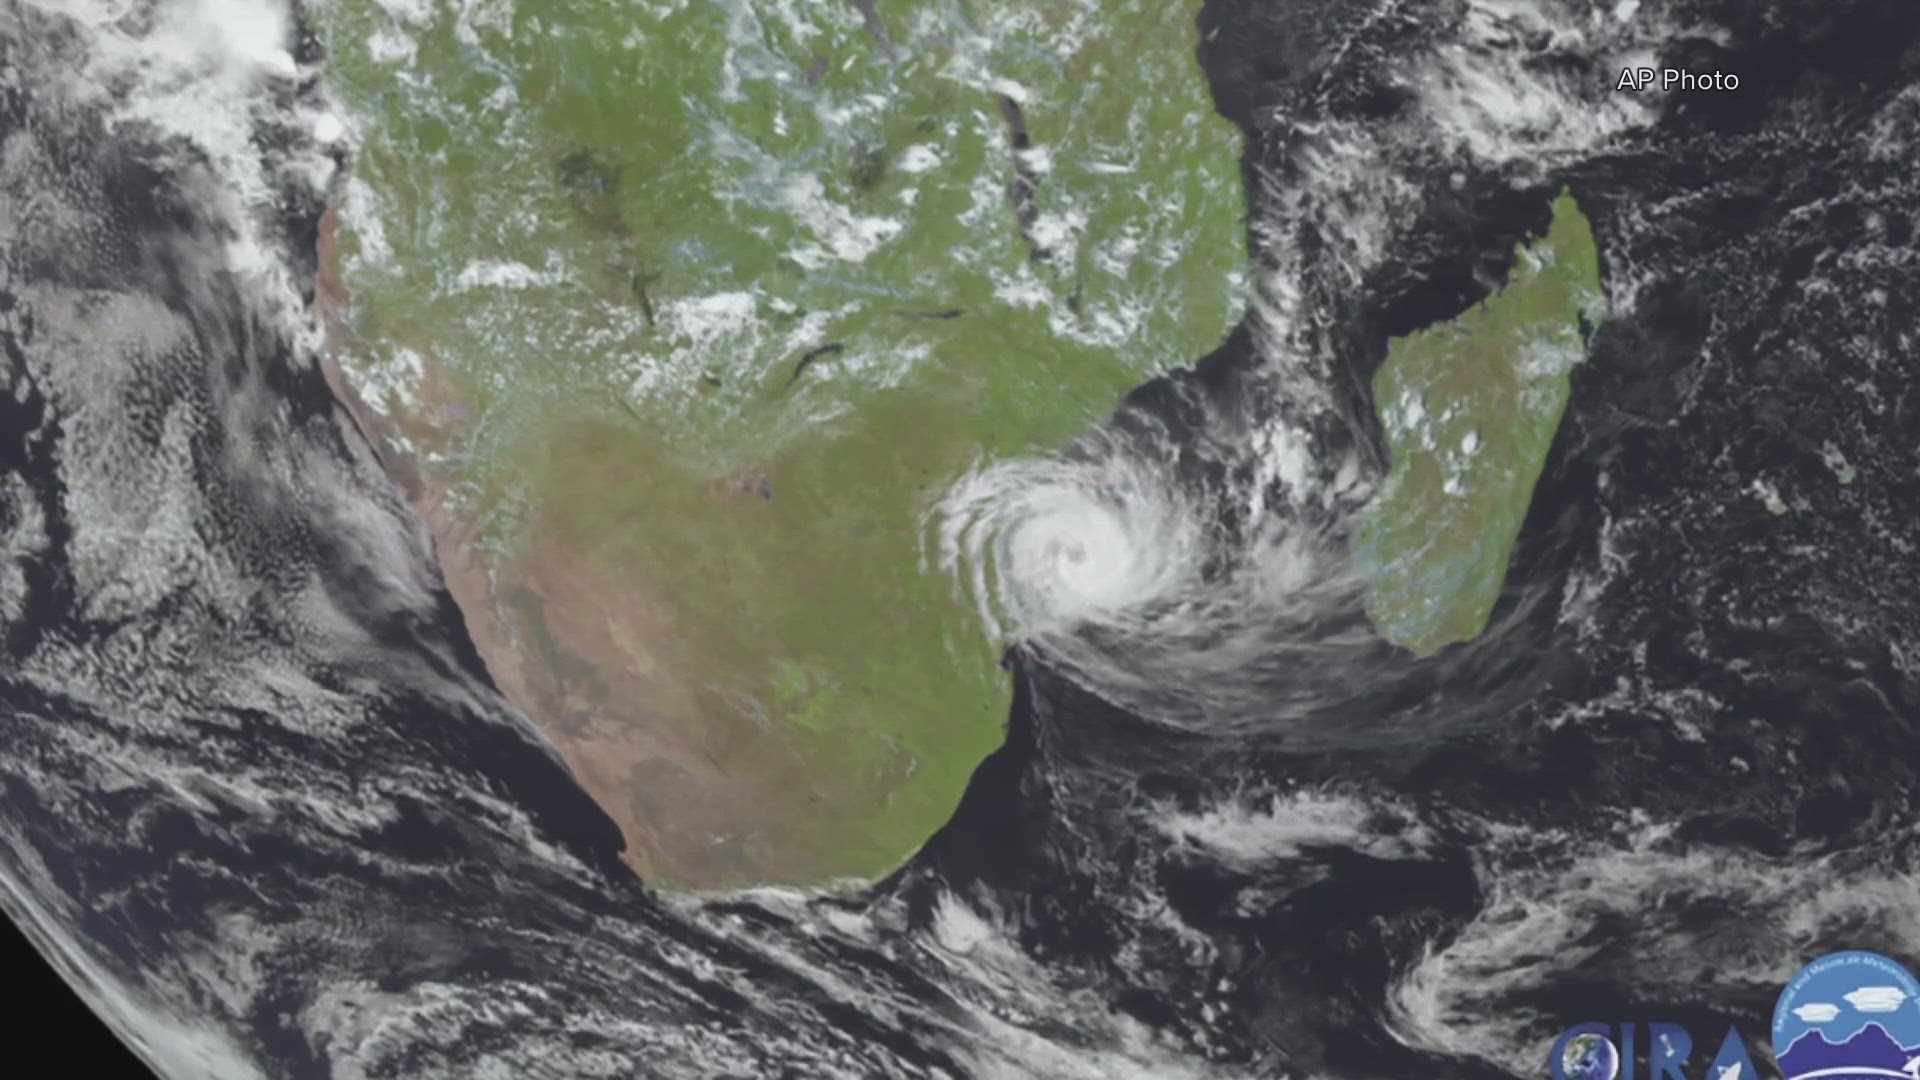 The storm was notably old, as far as storms go, and it traveled a remarkable distance. It formed back in February on the other side of the world.